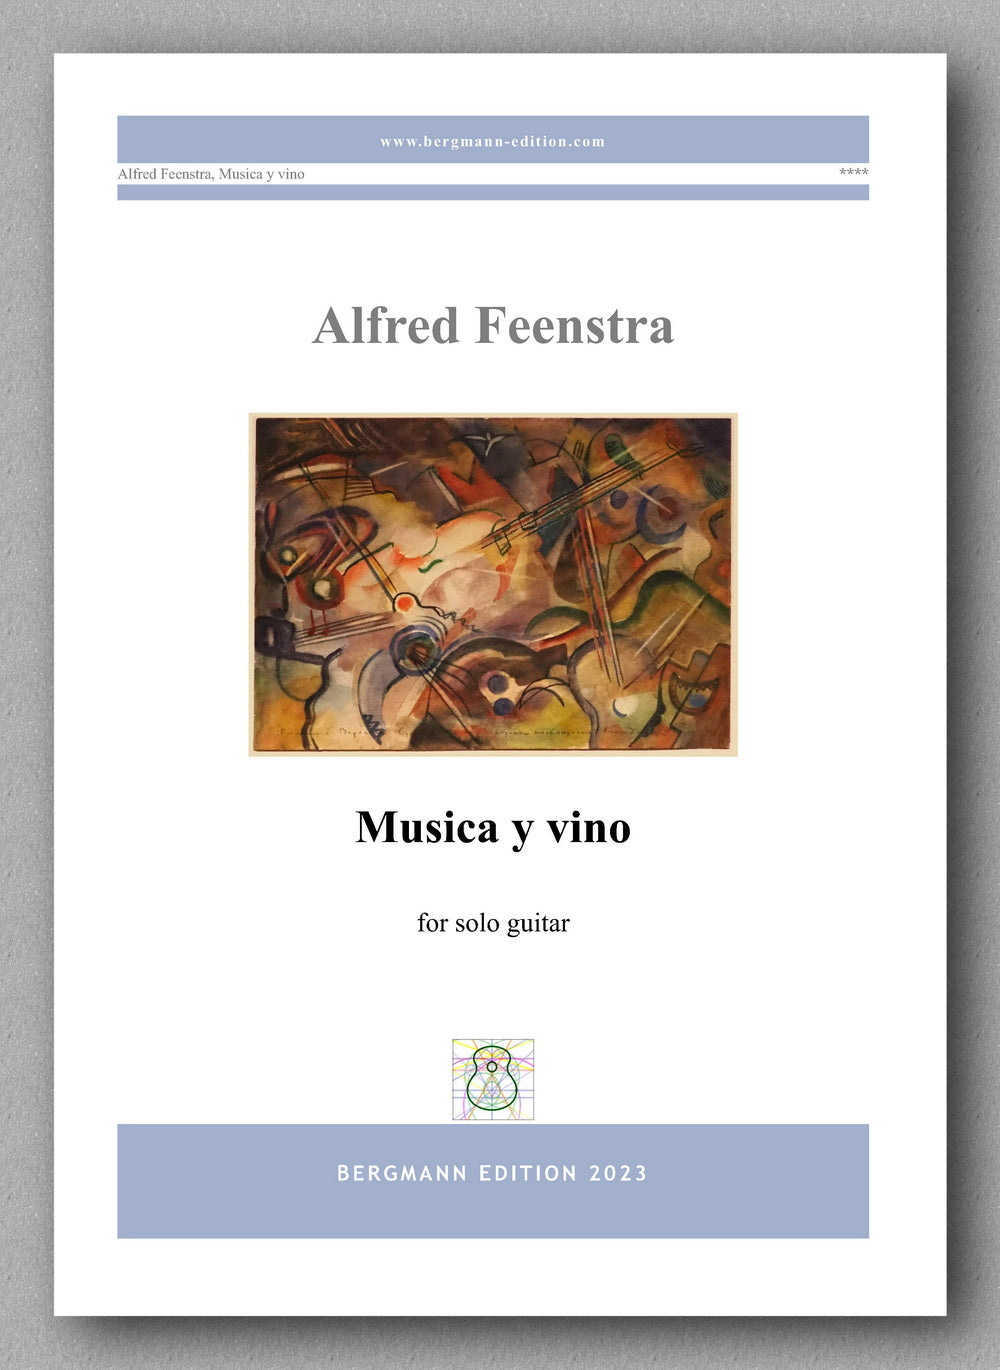 Feenstra, Musica y vino - preview of the cover